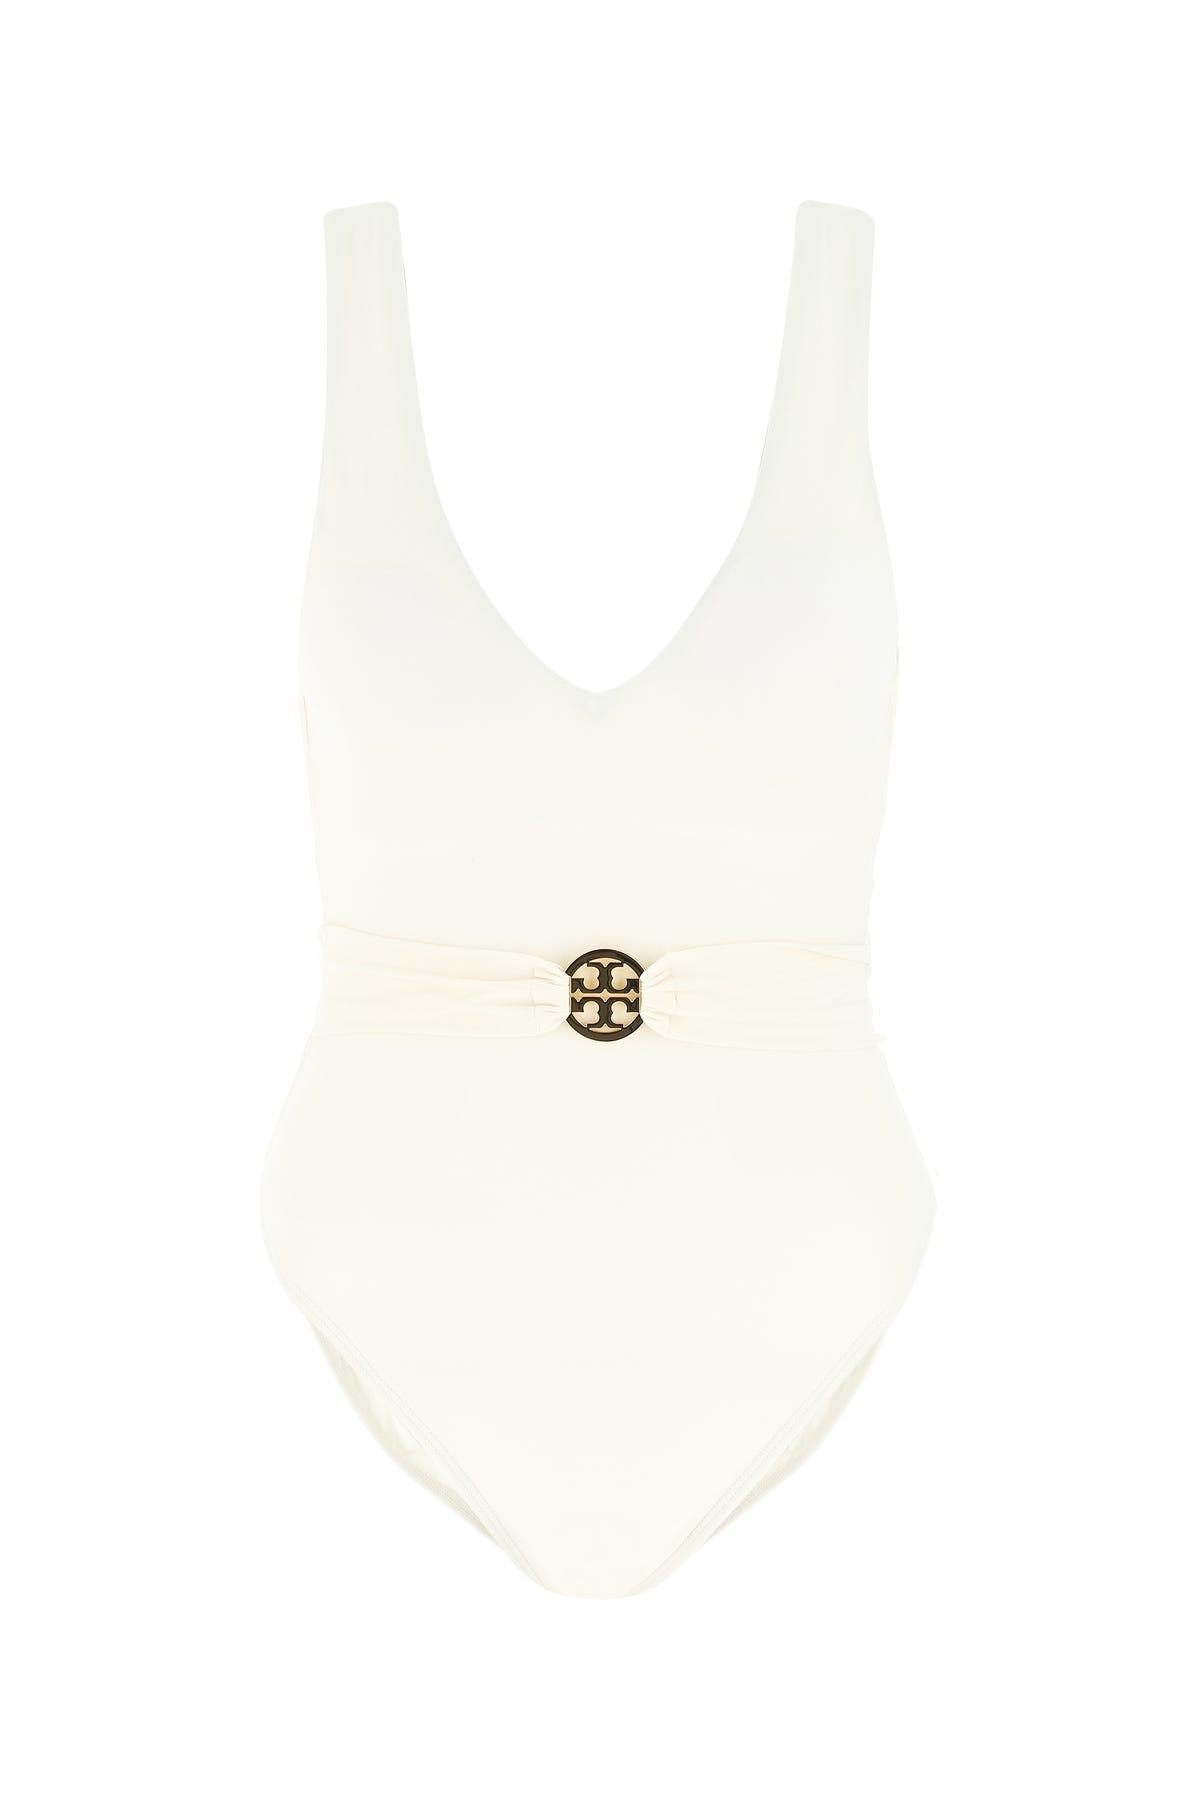 Tory Burch Synthetic Ivory Stretch Nylon Swimsuit in White - Lyst